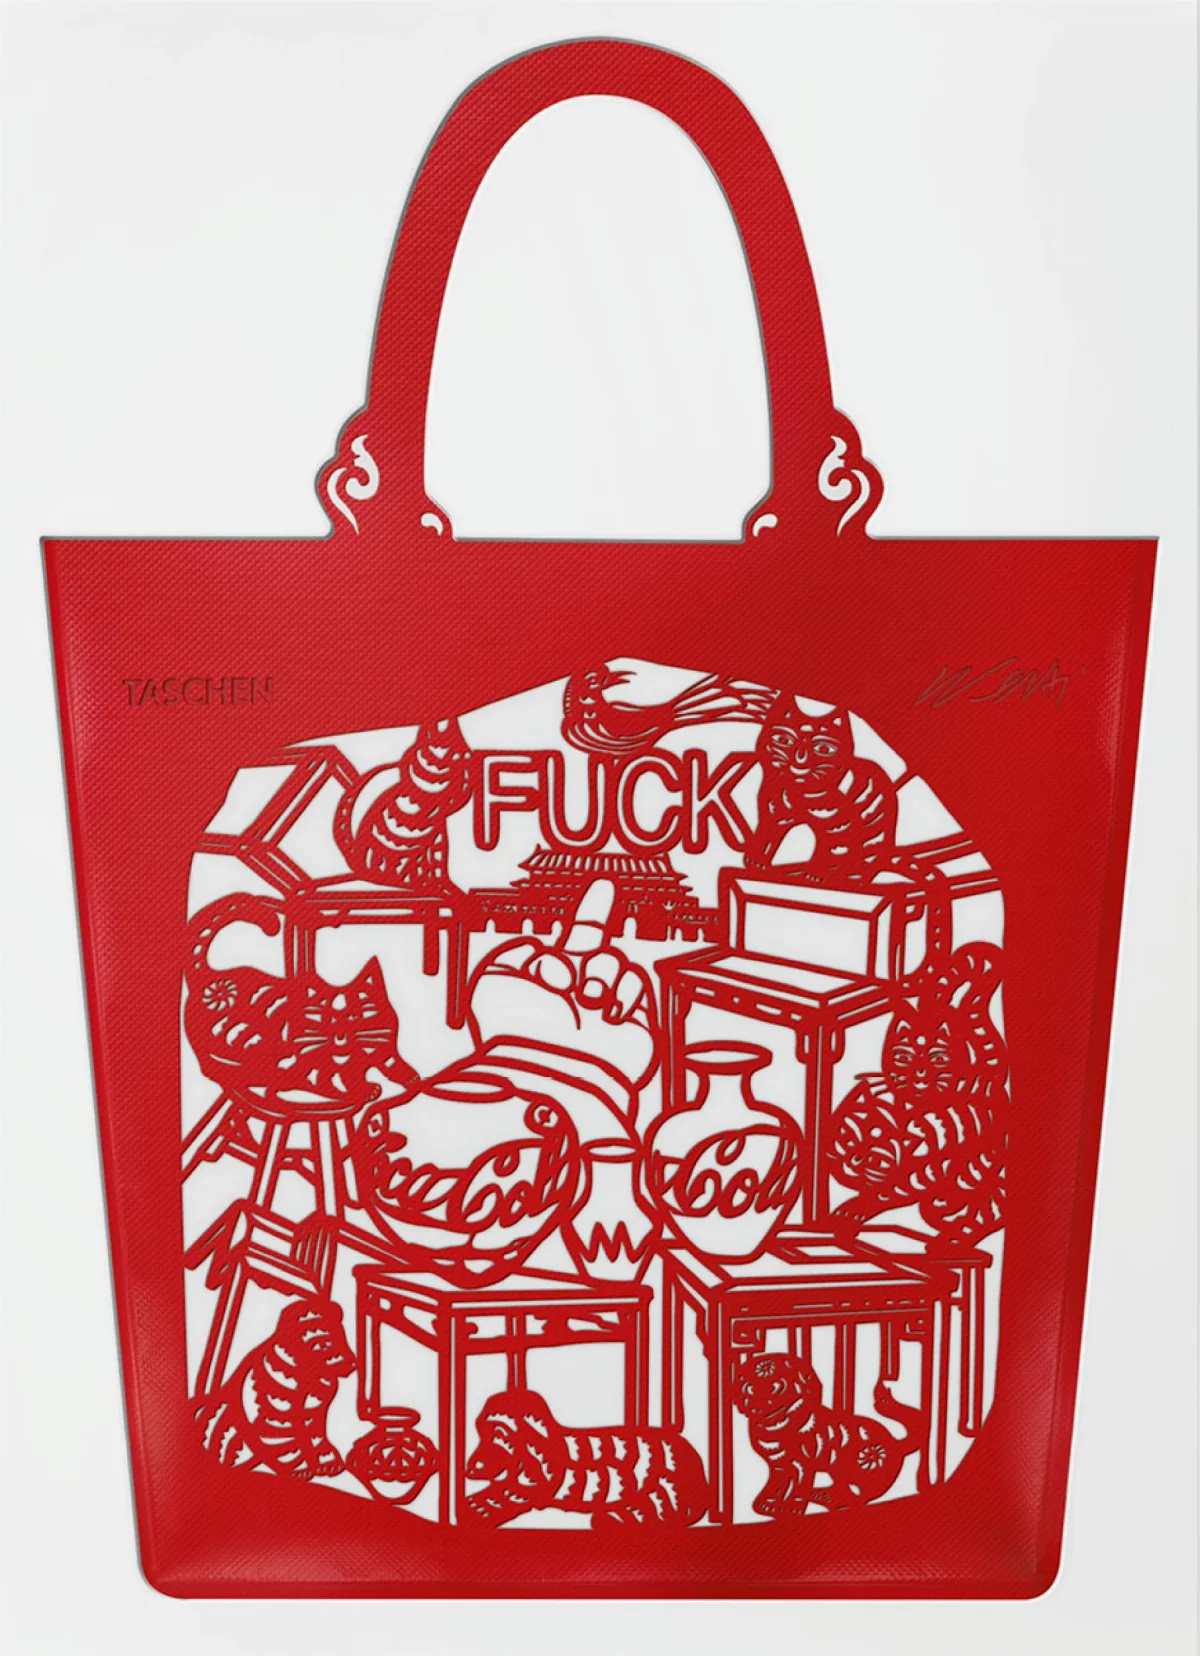 Ai Weiwei. The China Bag ‘Cats and Dogs’